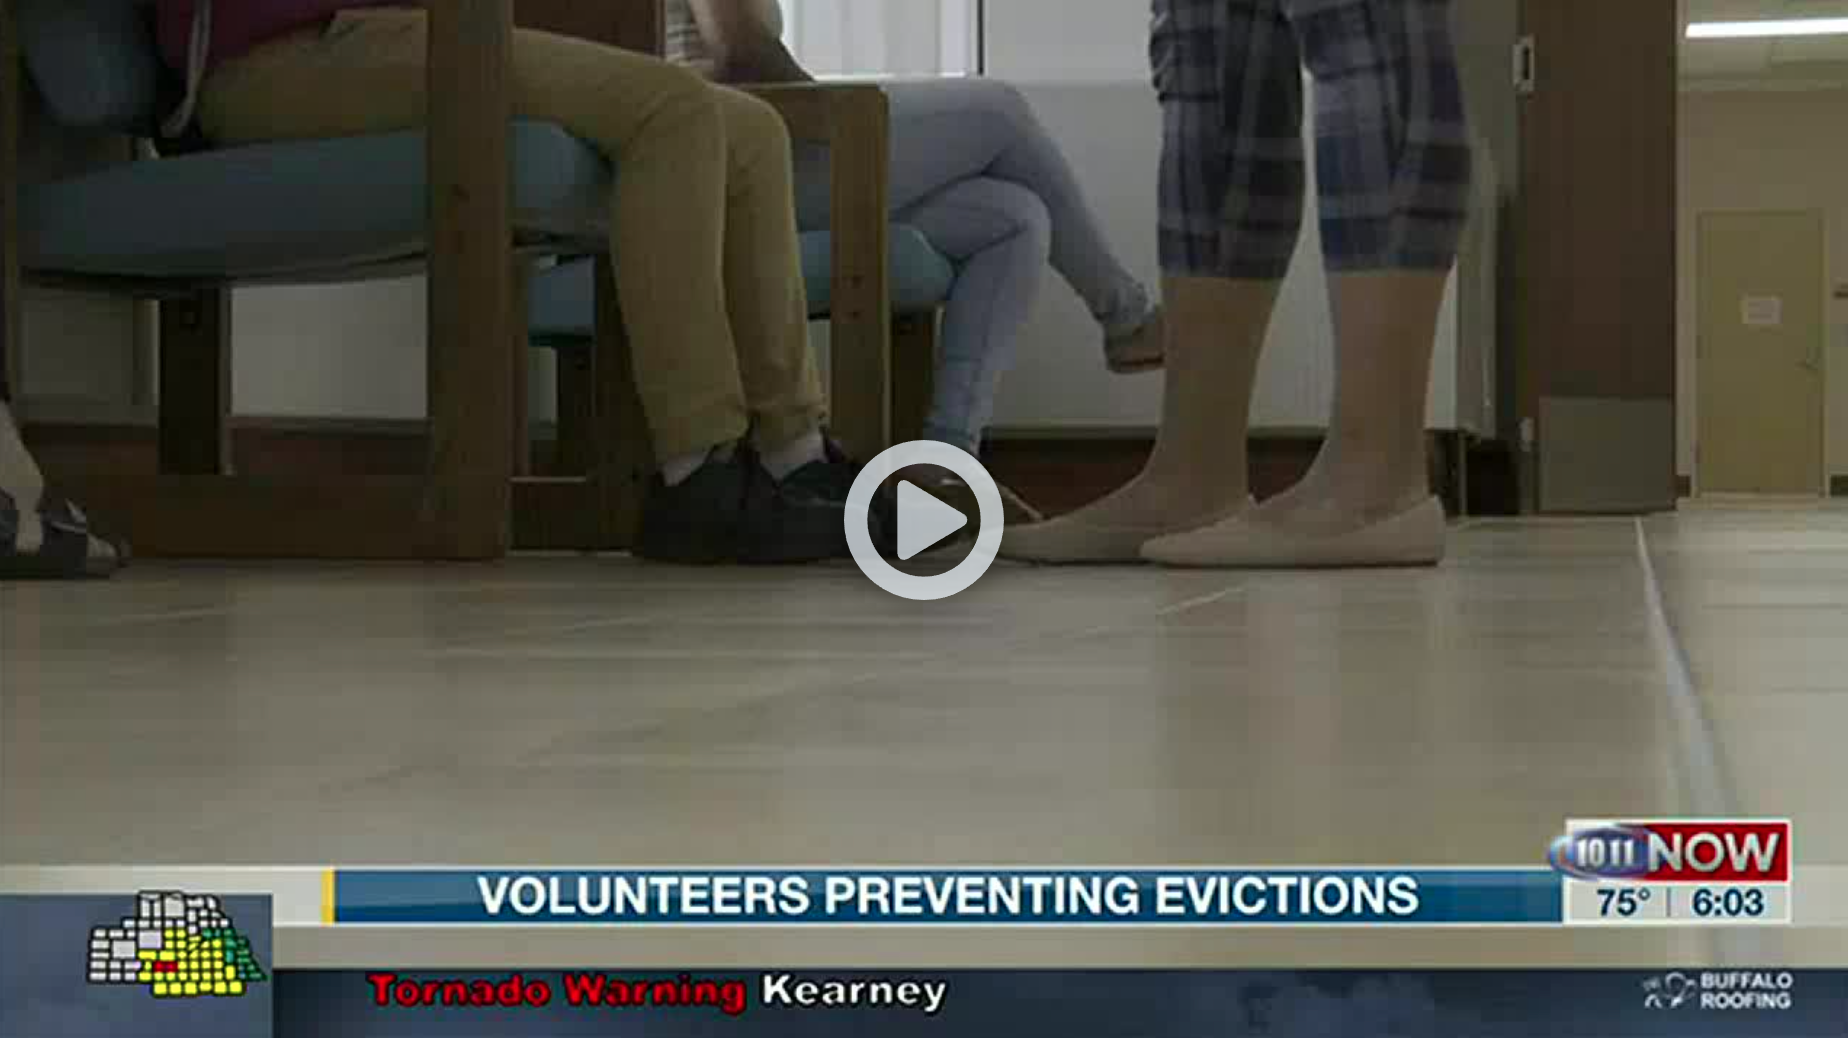 Screenshot of news story showing feet of clients and attorneys meeting at the courthouse